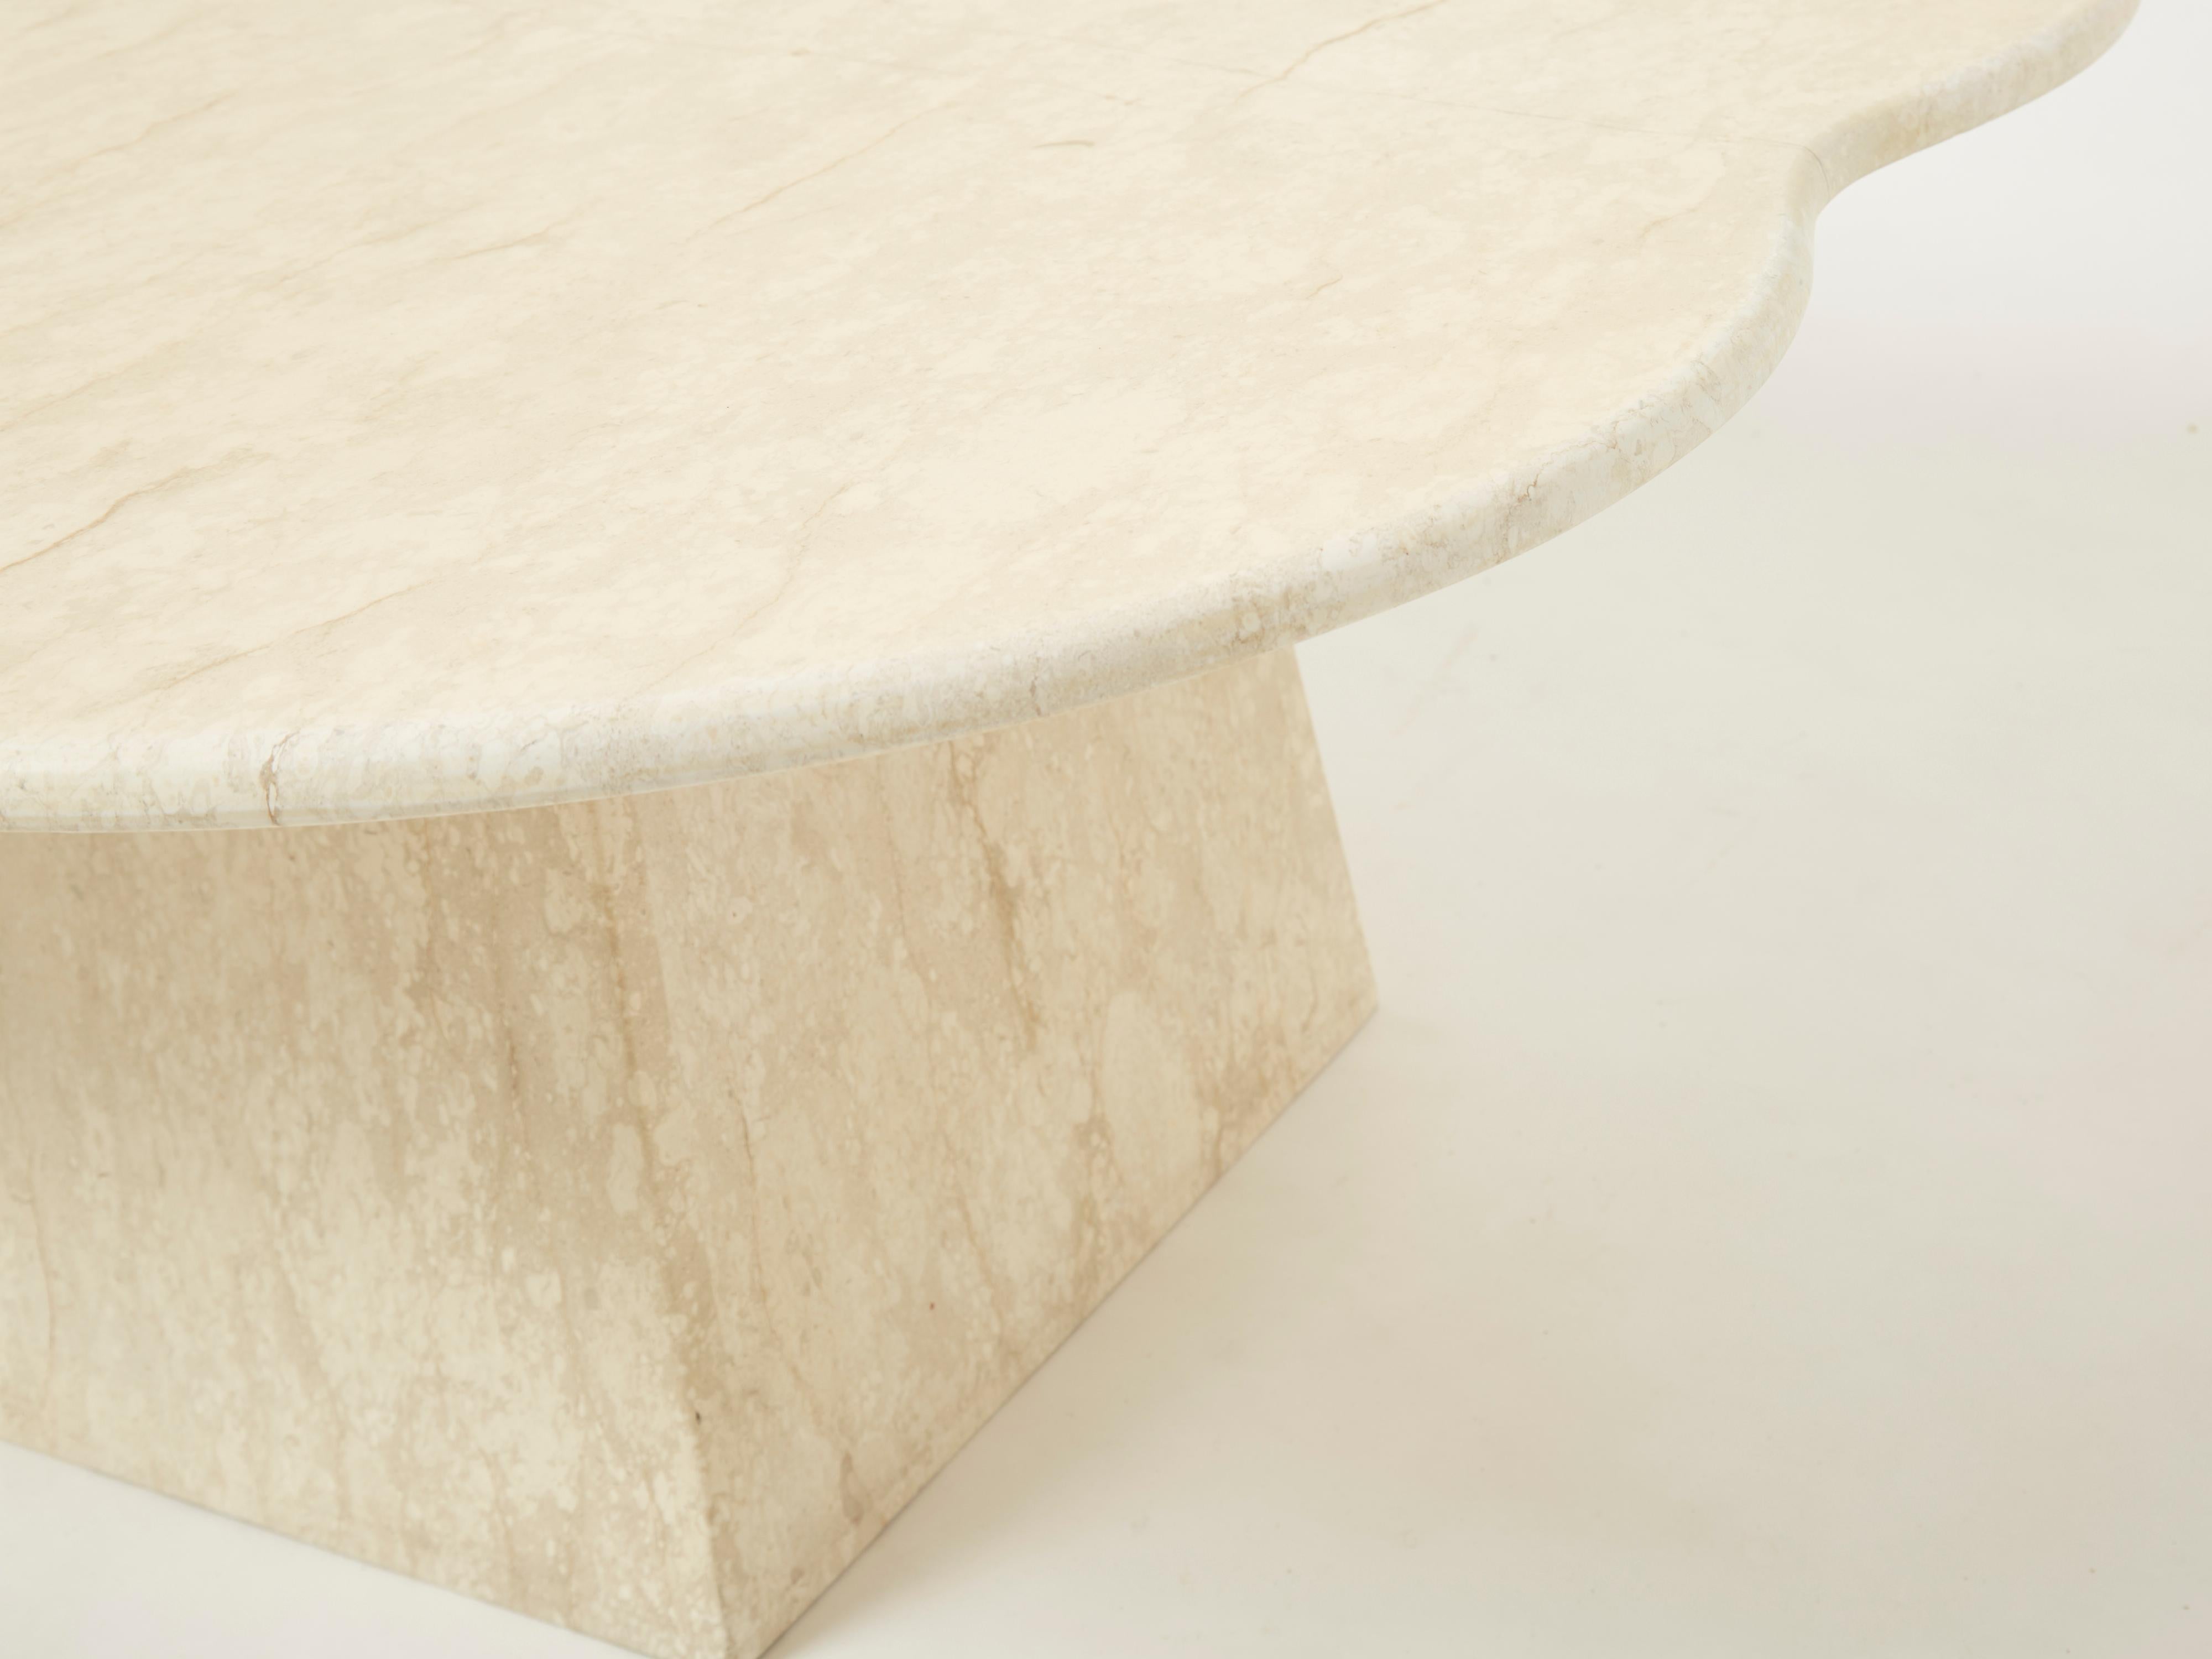 Late 20th Century Large Clover Shaped Coffee Table Made of Italian Travertine 1970s